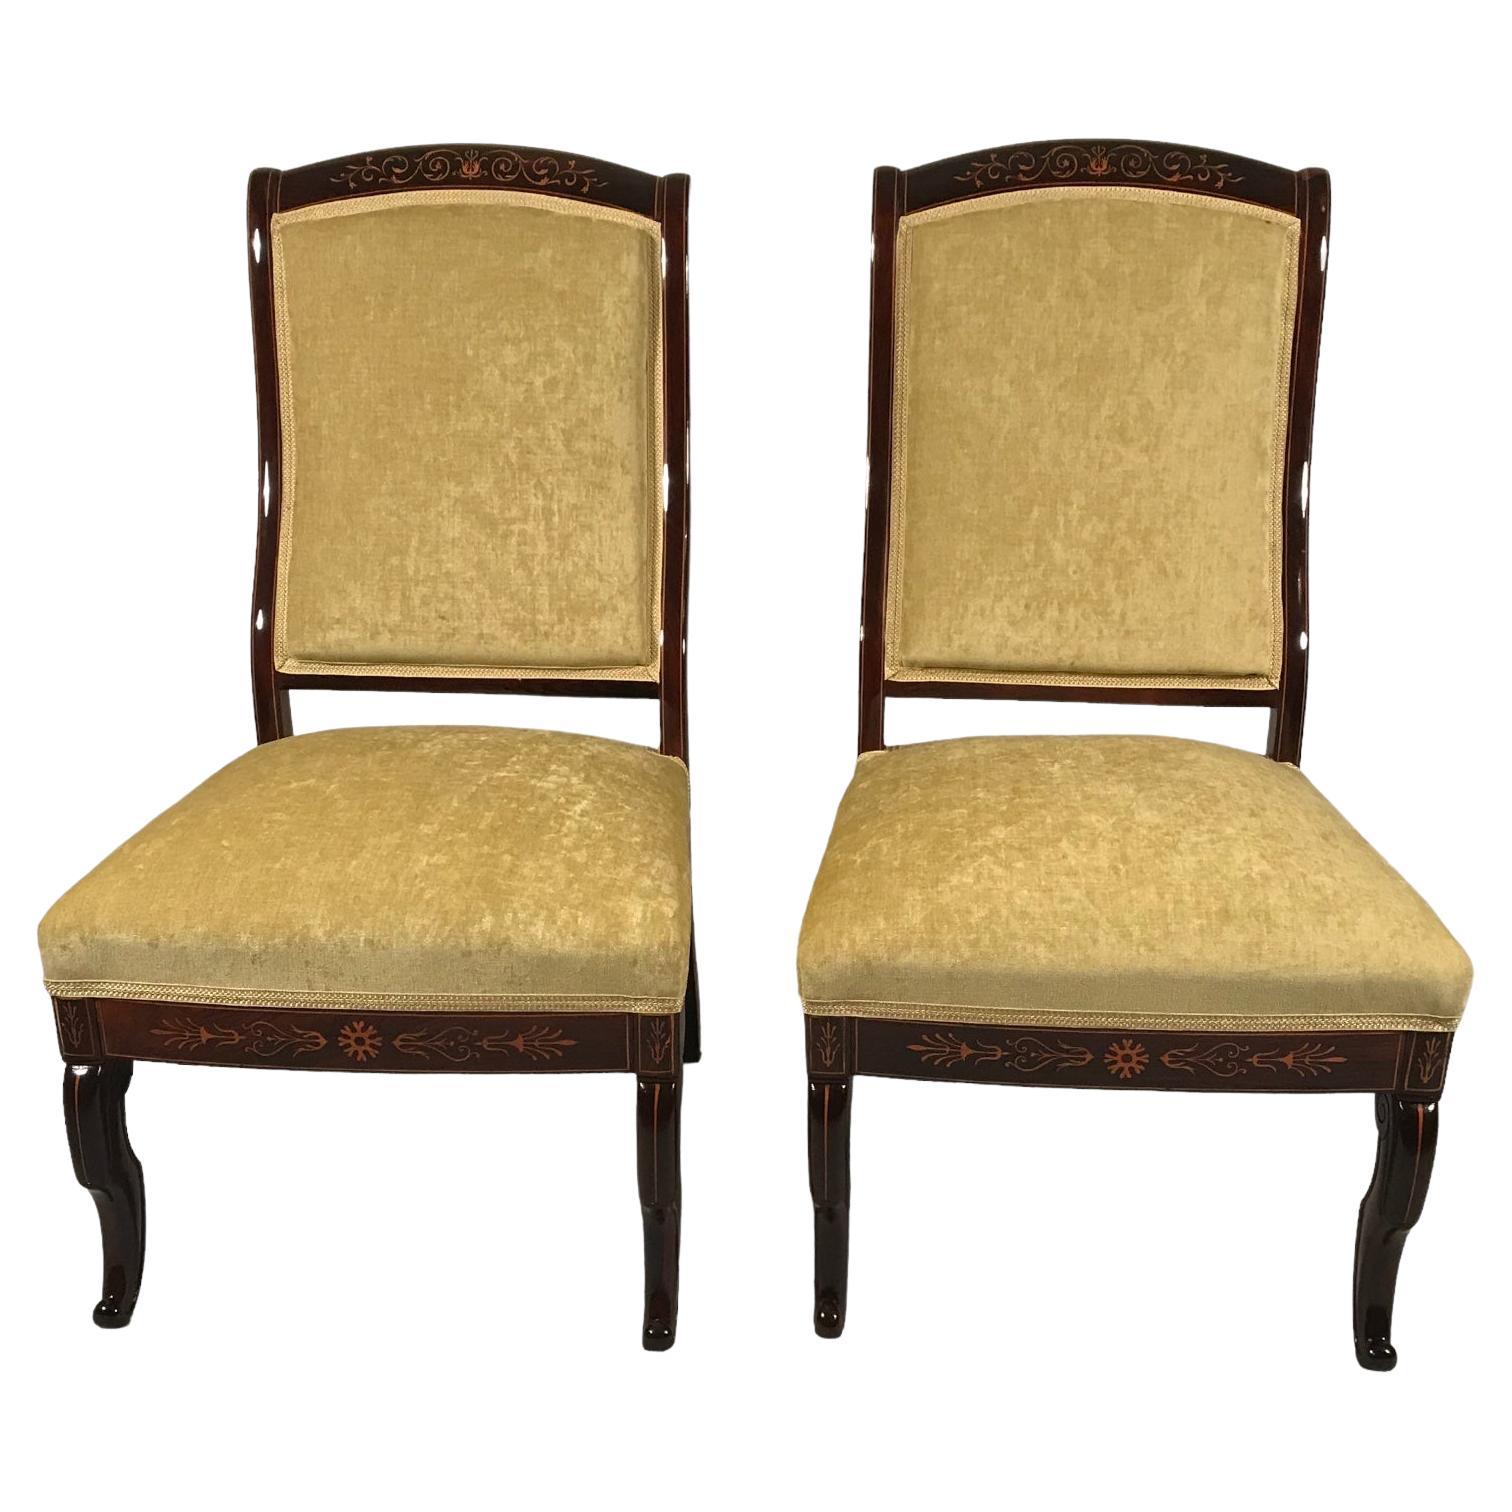 Pair of Low Chairs, French Restoration Period 1840 For Sale